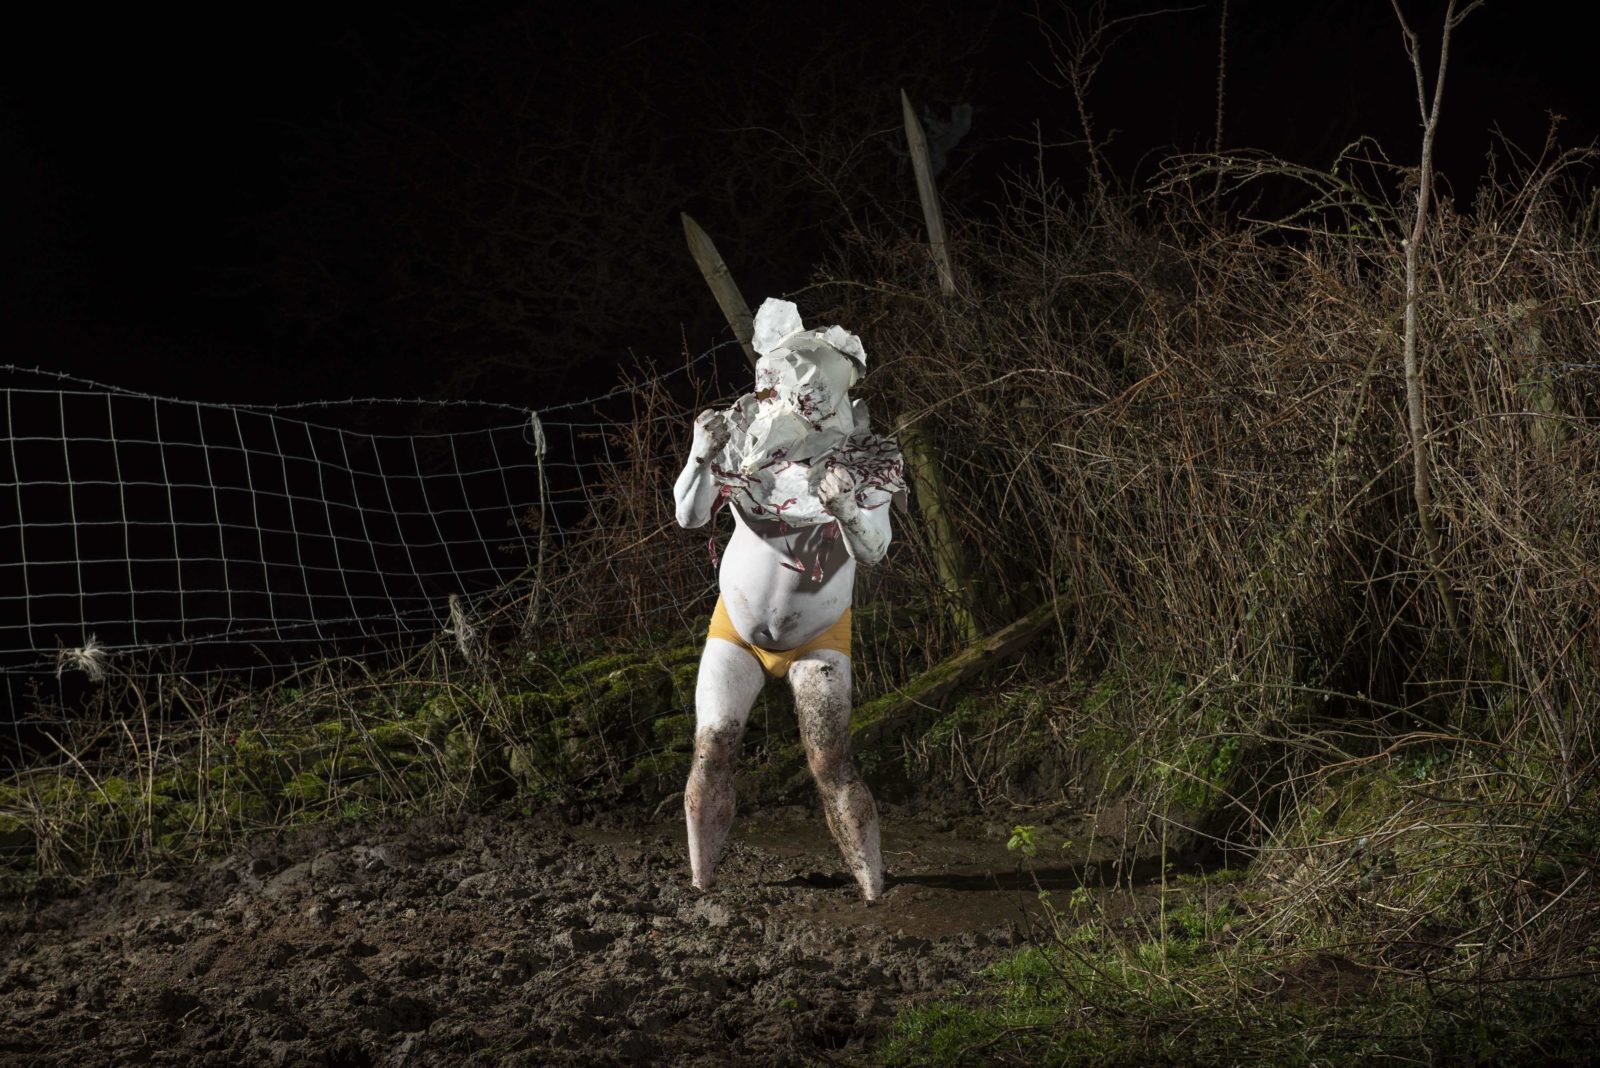 A man is outside in the dark in a muddy field, there is a barbed wire fence and bushes and branches behind him. He is covered in white powder and wearing yellow boxers, and on his head he is a bear shaped mask made of paper, covering his head and shoulders.